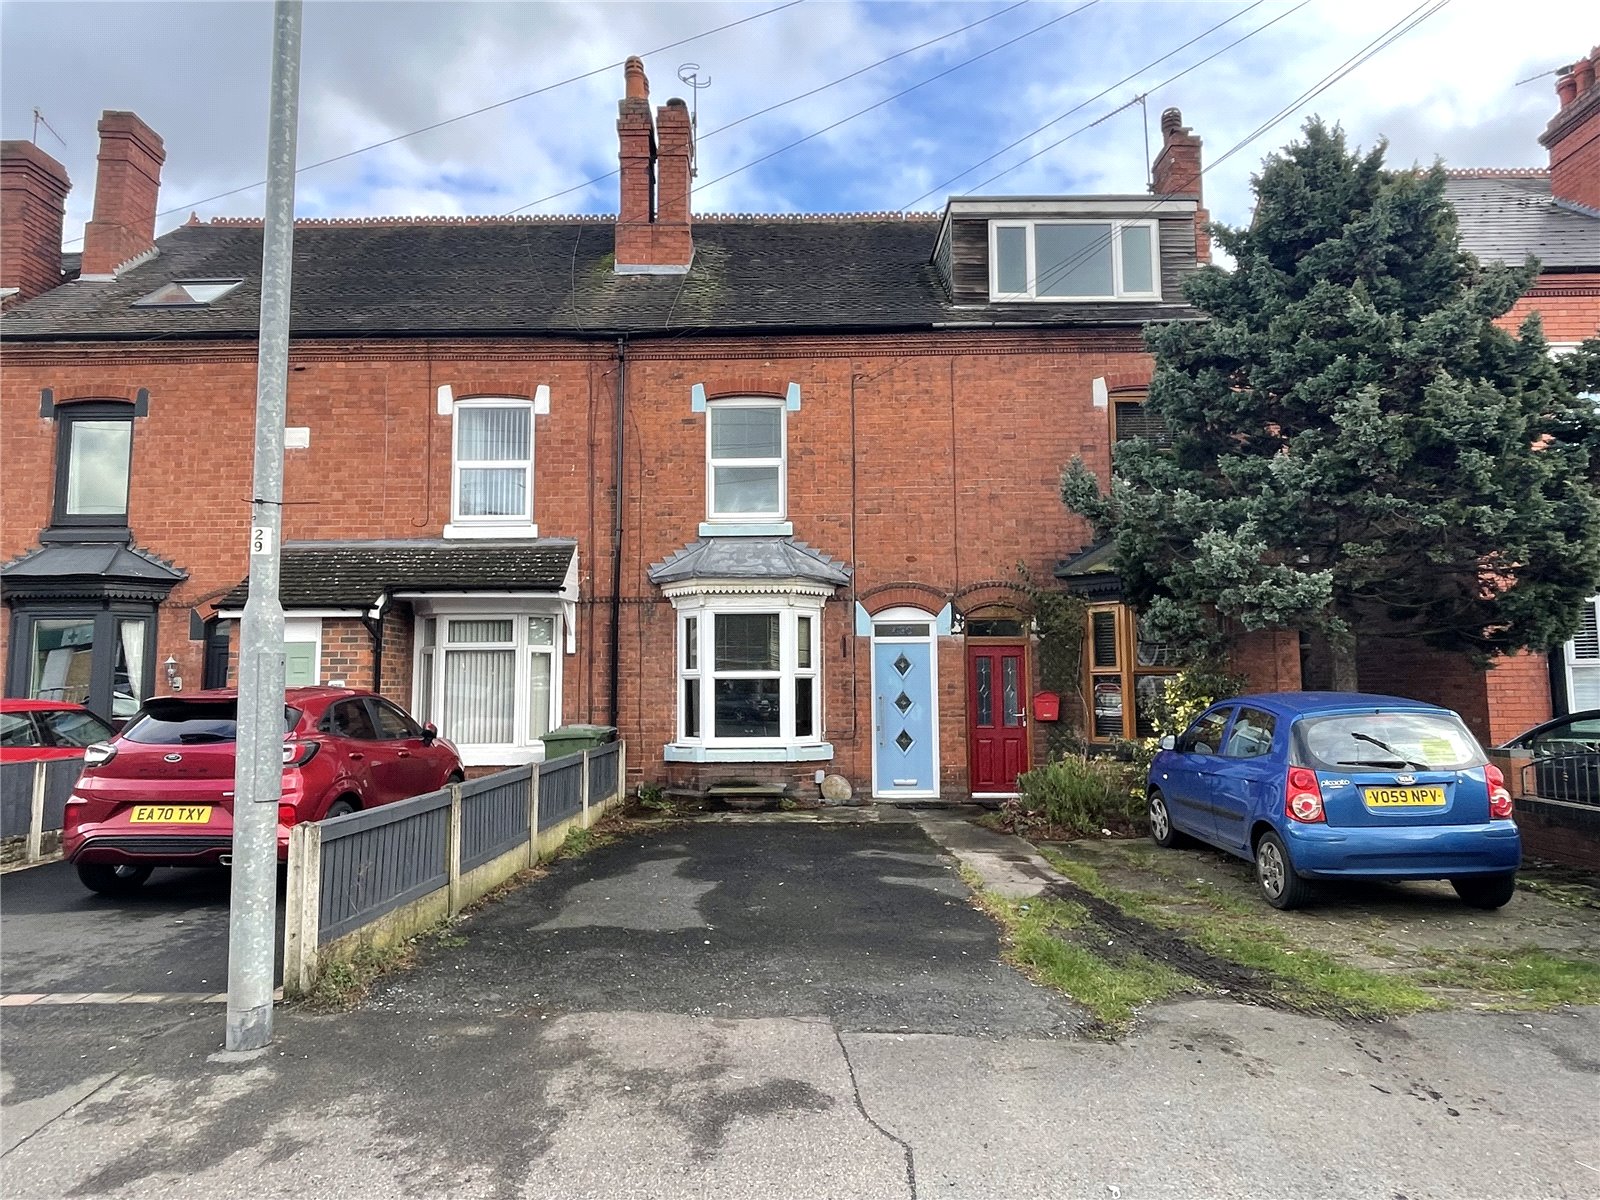 Stourport Road, Kidderminster, Worcestershire, DY11